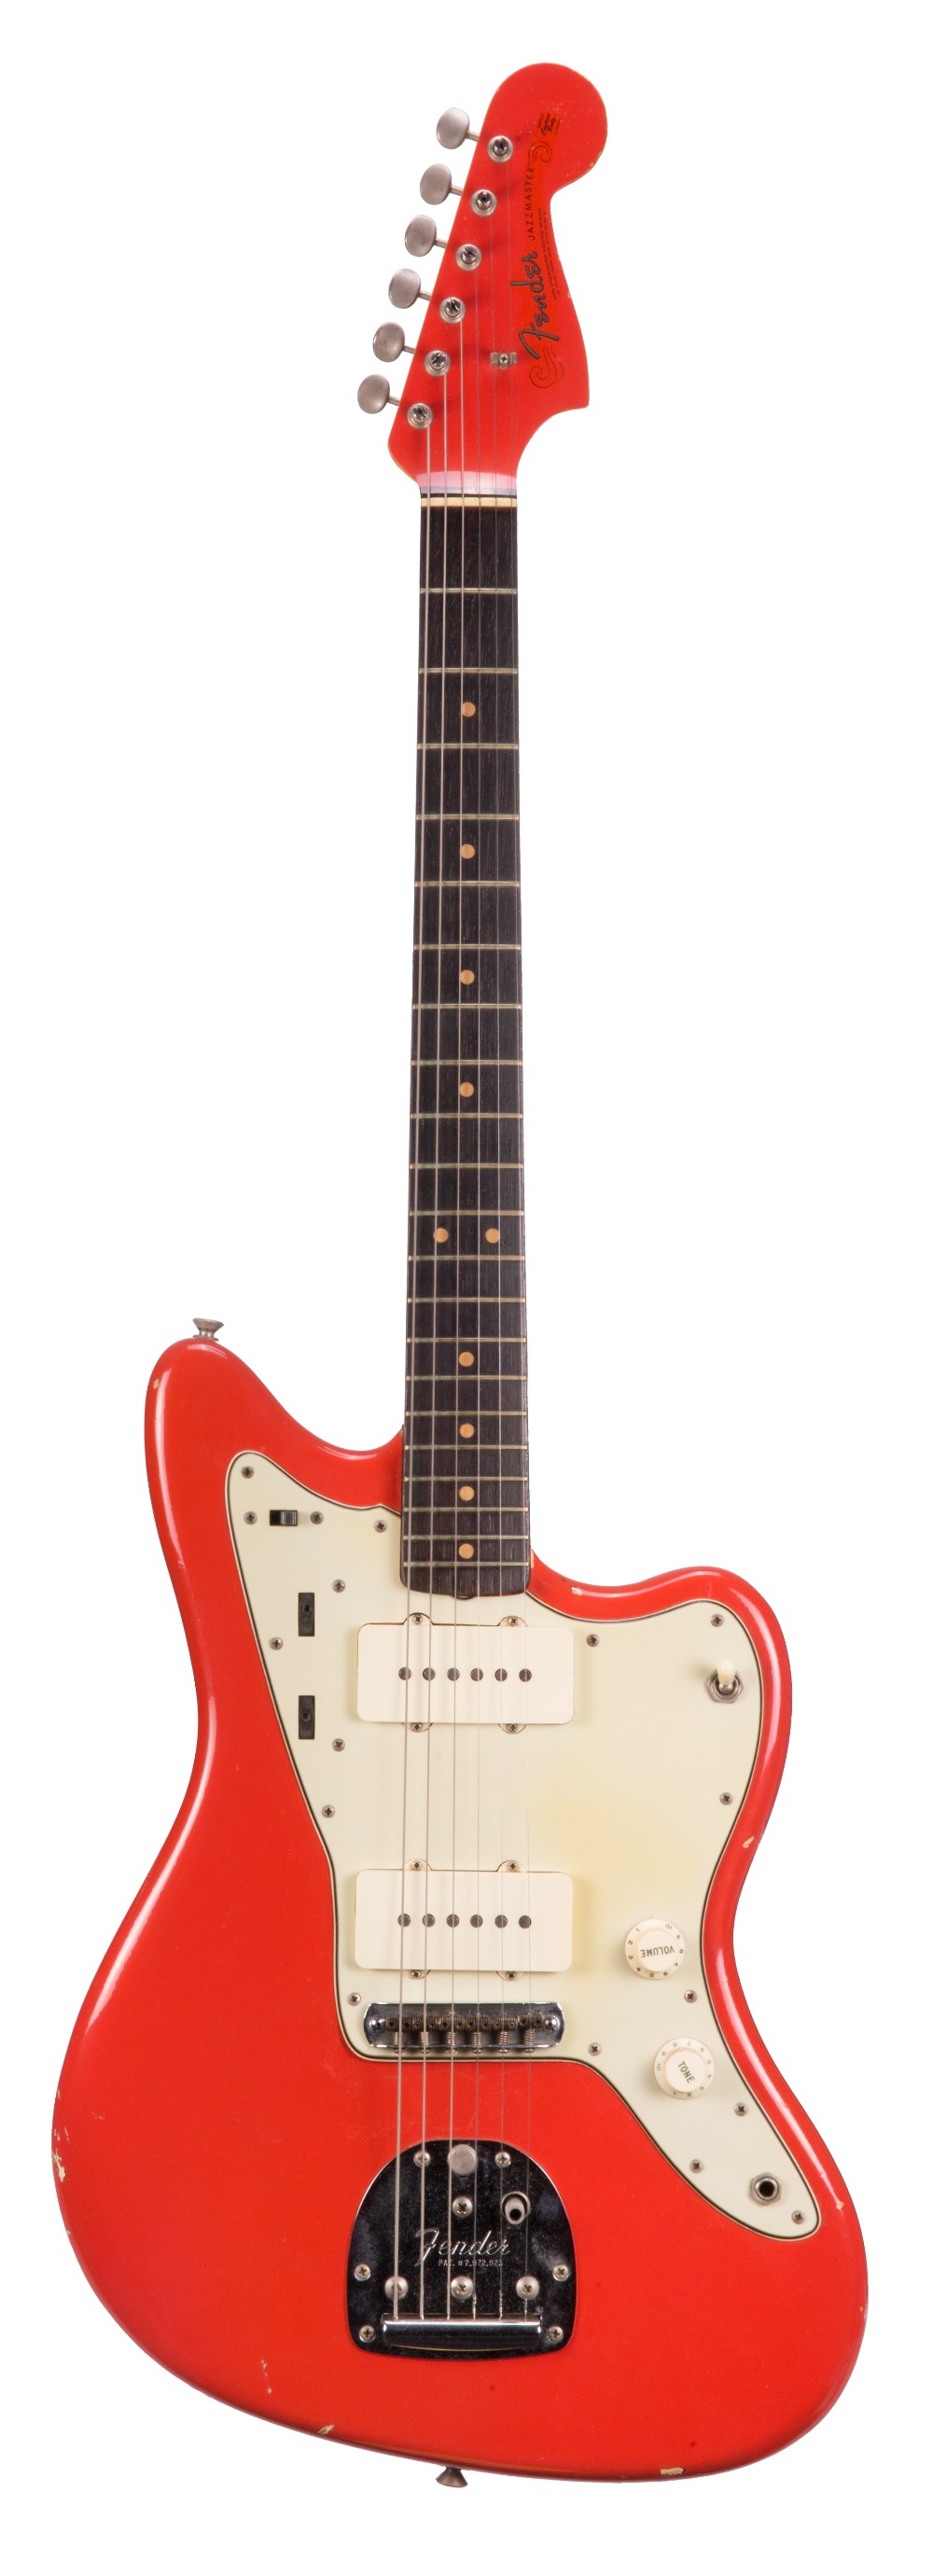 1964 Fender Jazzmaster electric guitar, made in USA, ser. no. L4xxx3; Finish: Fiesta red with